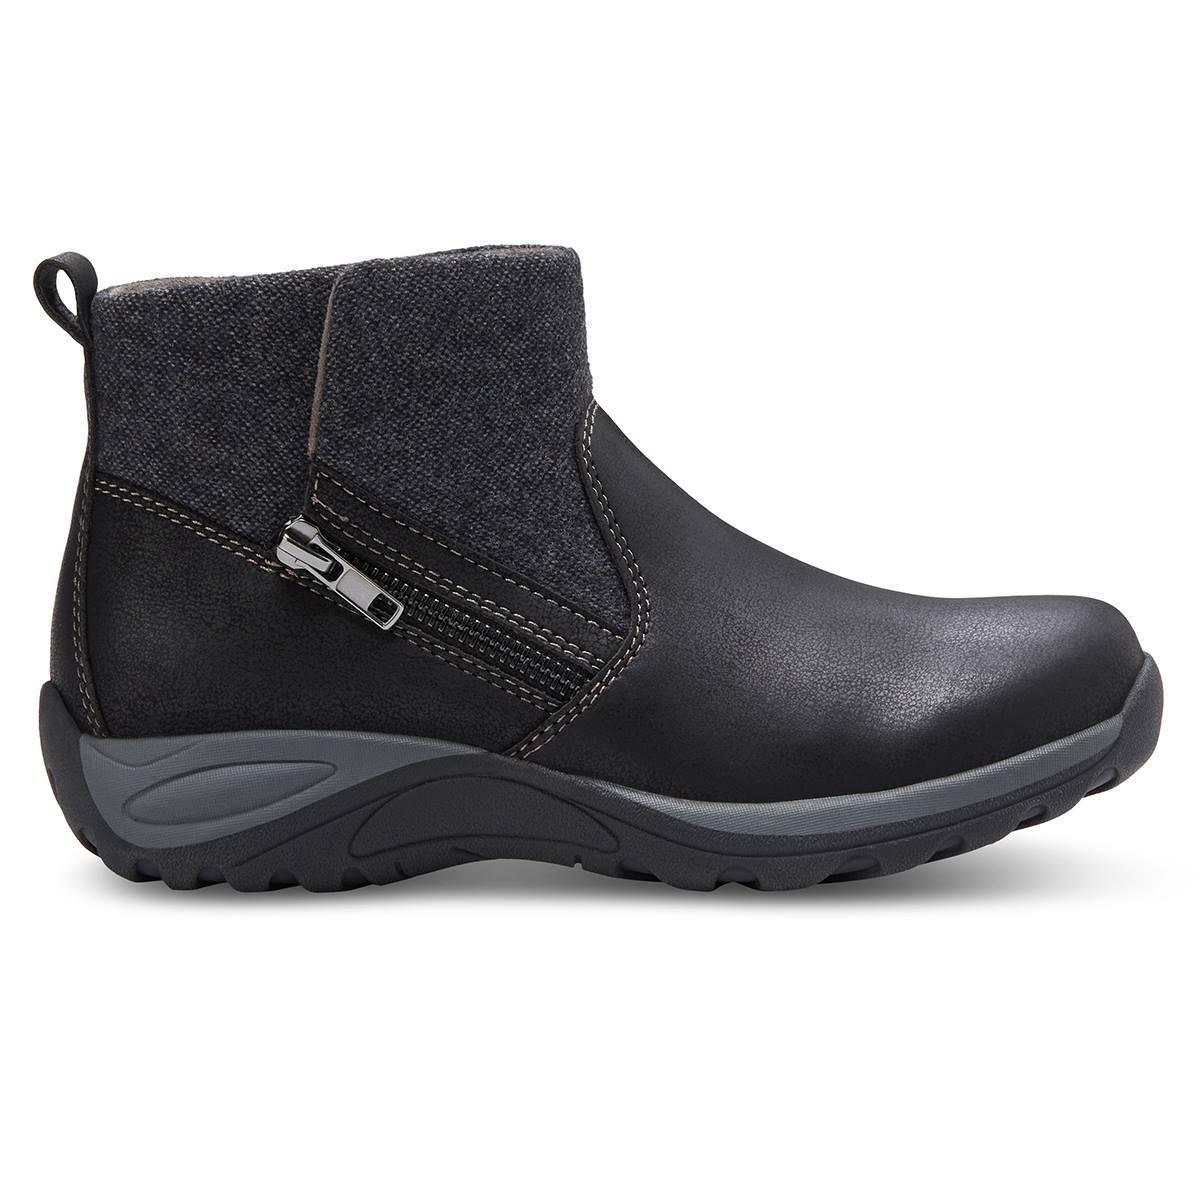 Eastland Betty Womens Ankle Boots Black Product Image